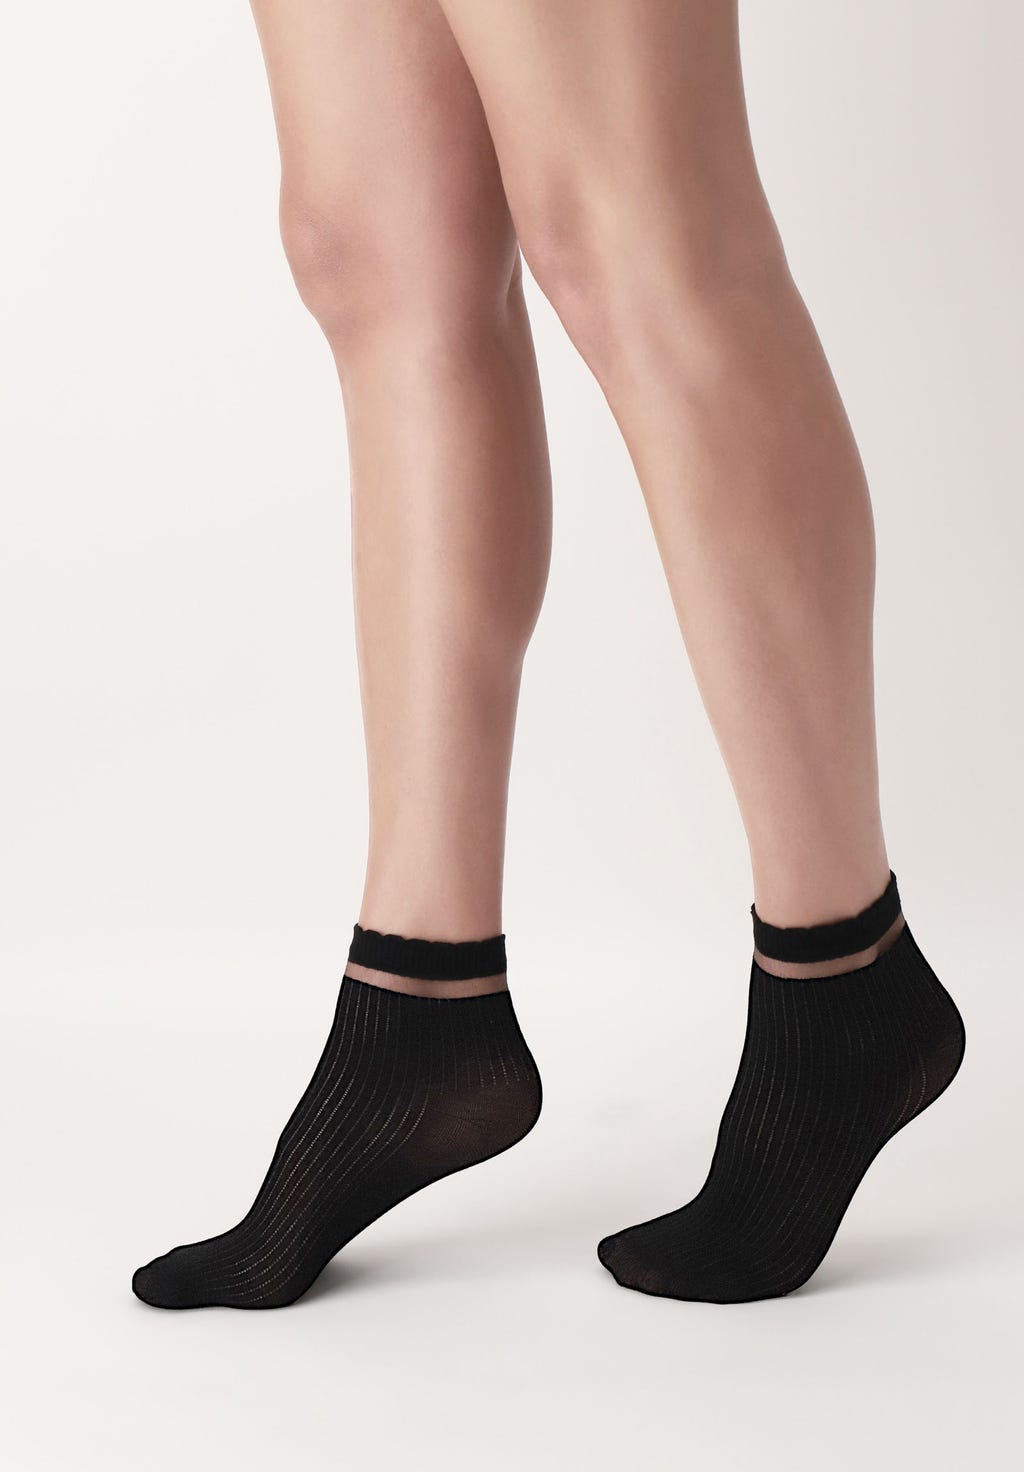 OroblÌ_ Gentle Sock - Black light ribbed cotton fashion ankle socks with a sheer striped cuff and scalloped edge.